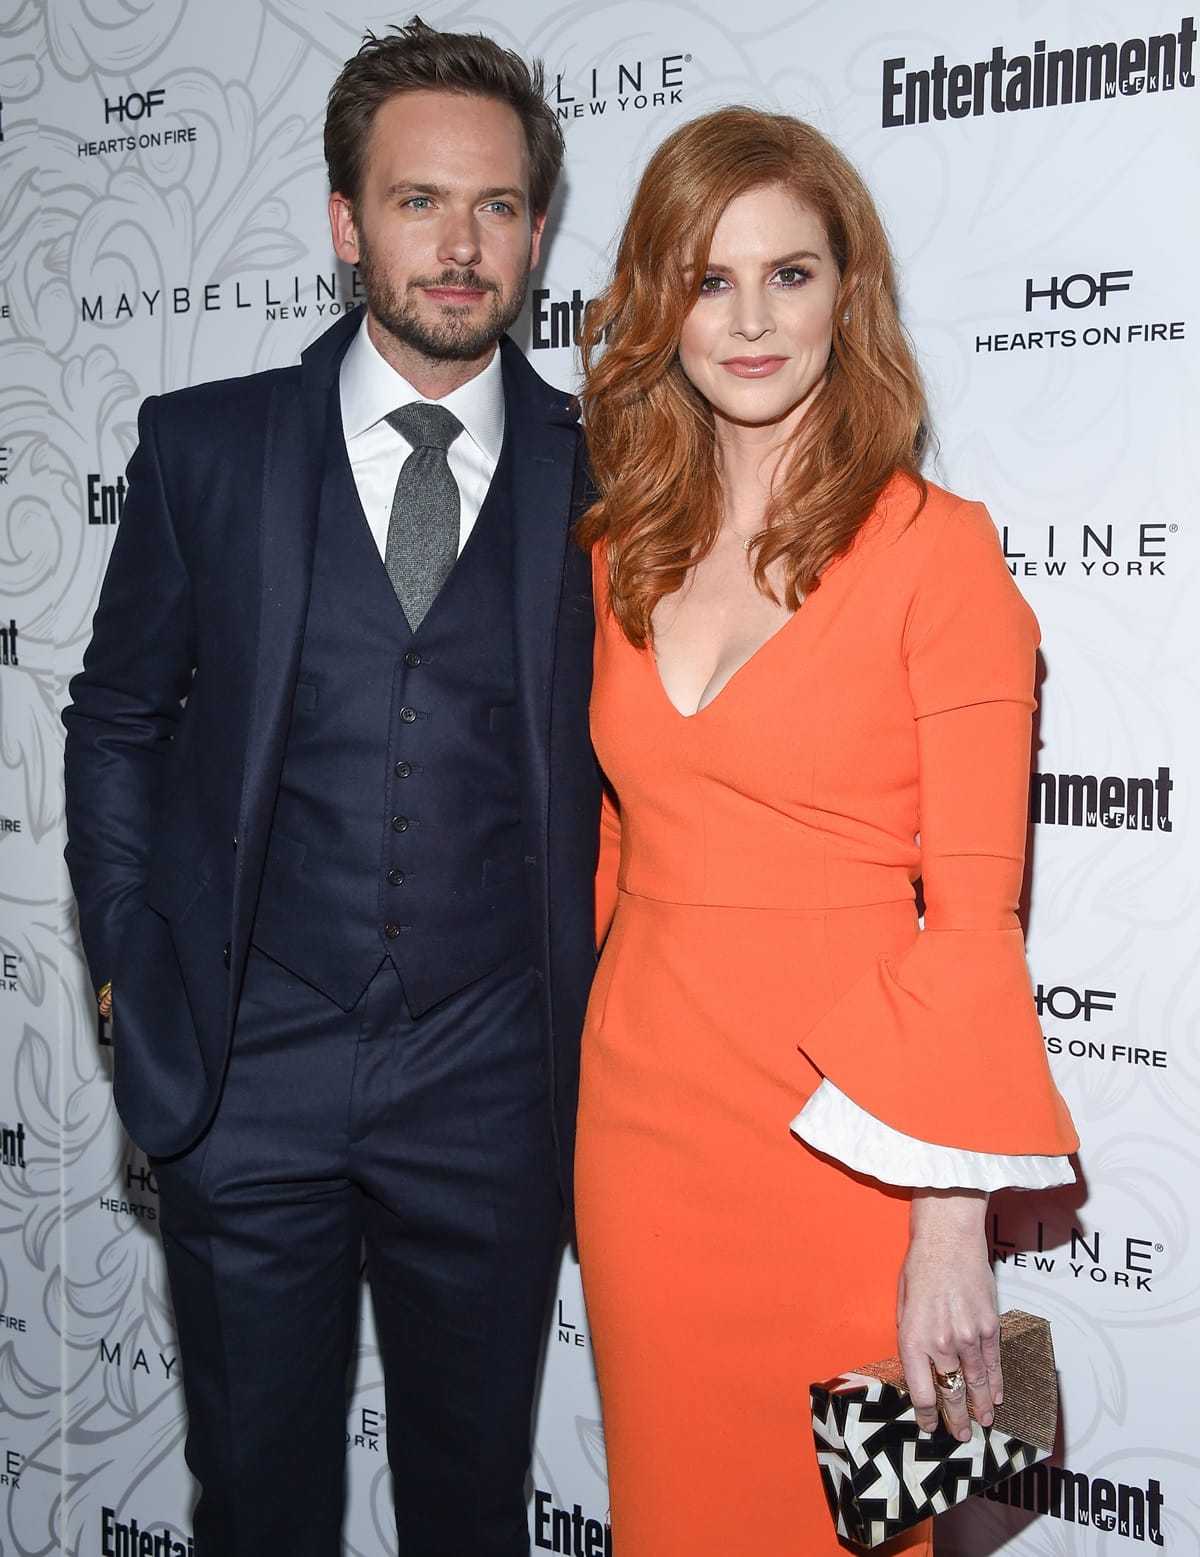 At the esteemed Entertainment Weekly celebration honoring Screen Actors Guild Awards nominees, actors Patrick J. Adams (5ft 11 ½) and Sarah Rafferty (5ft 8 ¾) arrived with grace at the Chateau Marmont in Los Angeles on January 28, 2017